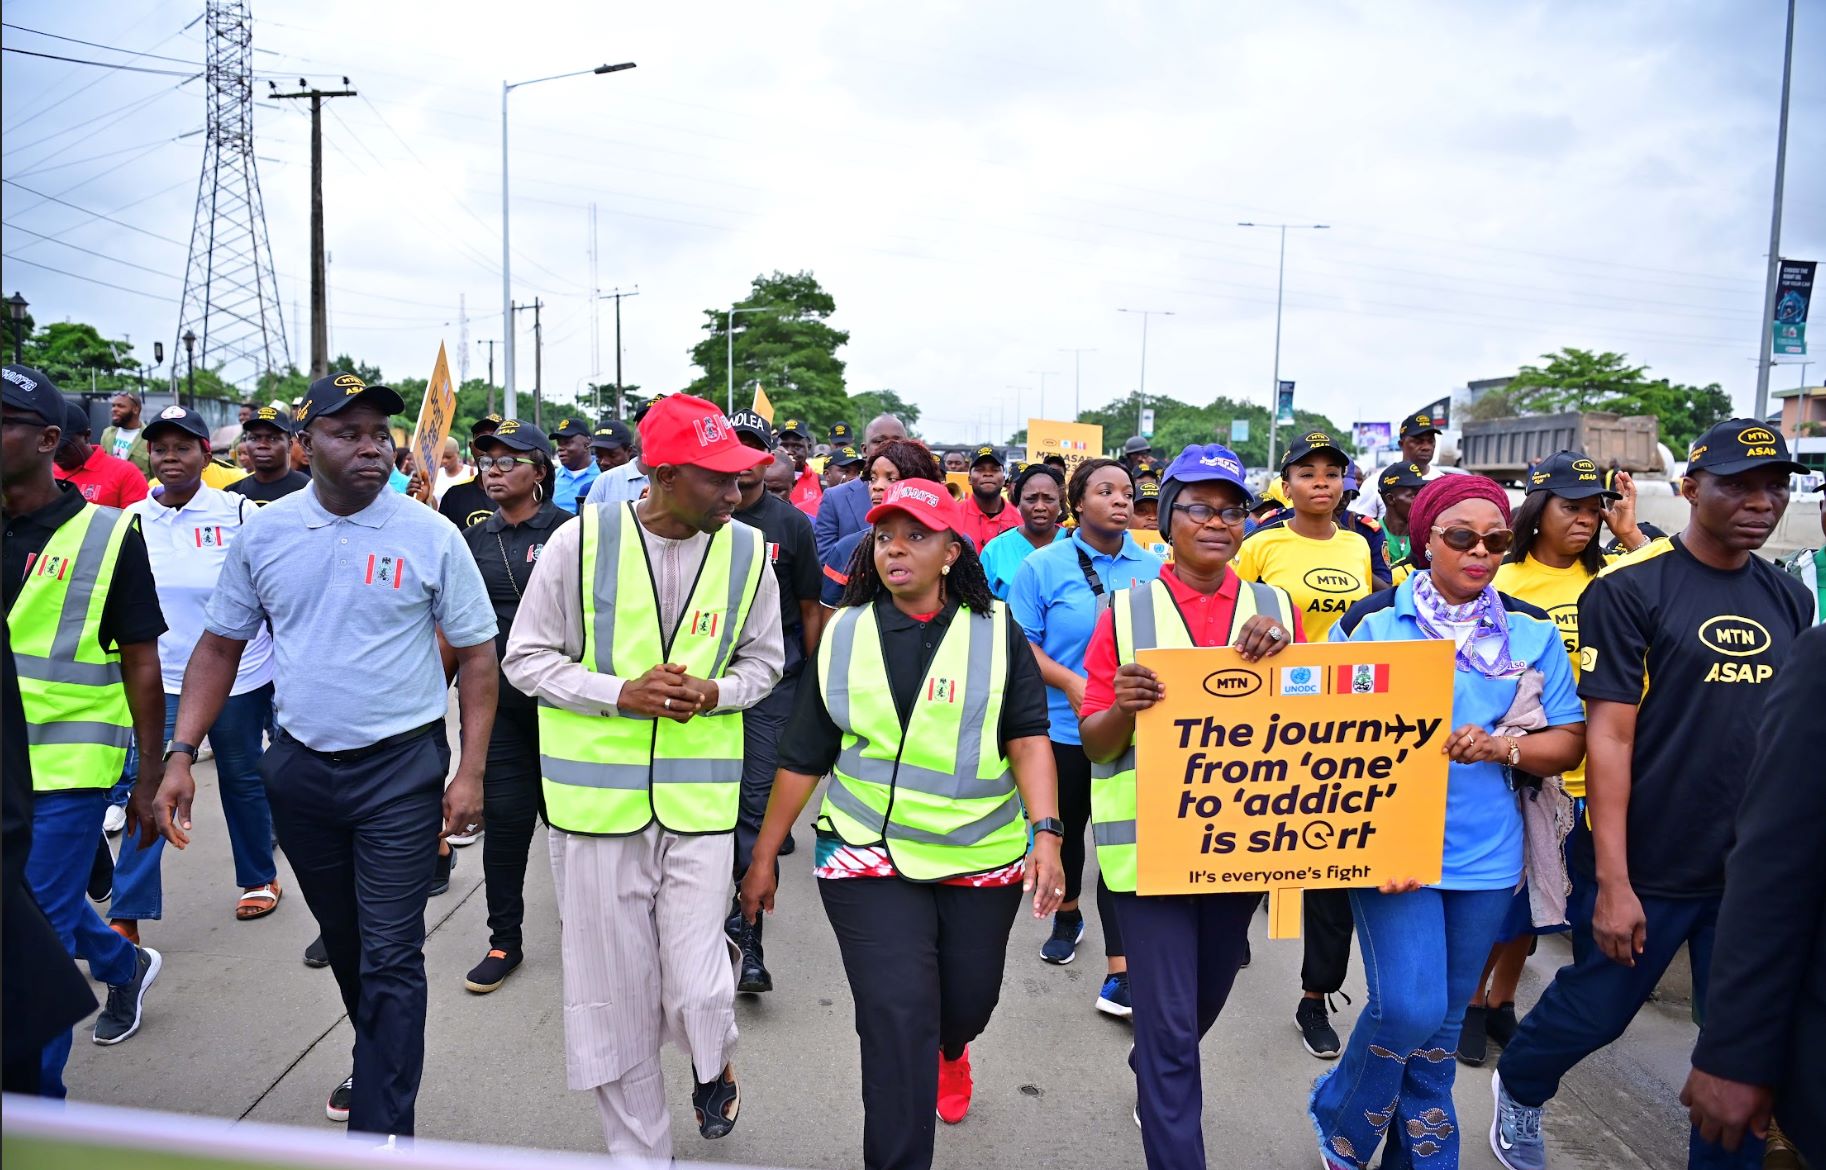 World Drug Day: Residents Troop Out In Large Numbers To Walk Against Substance Abuse In Lagos, Abuja